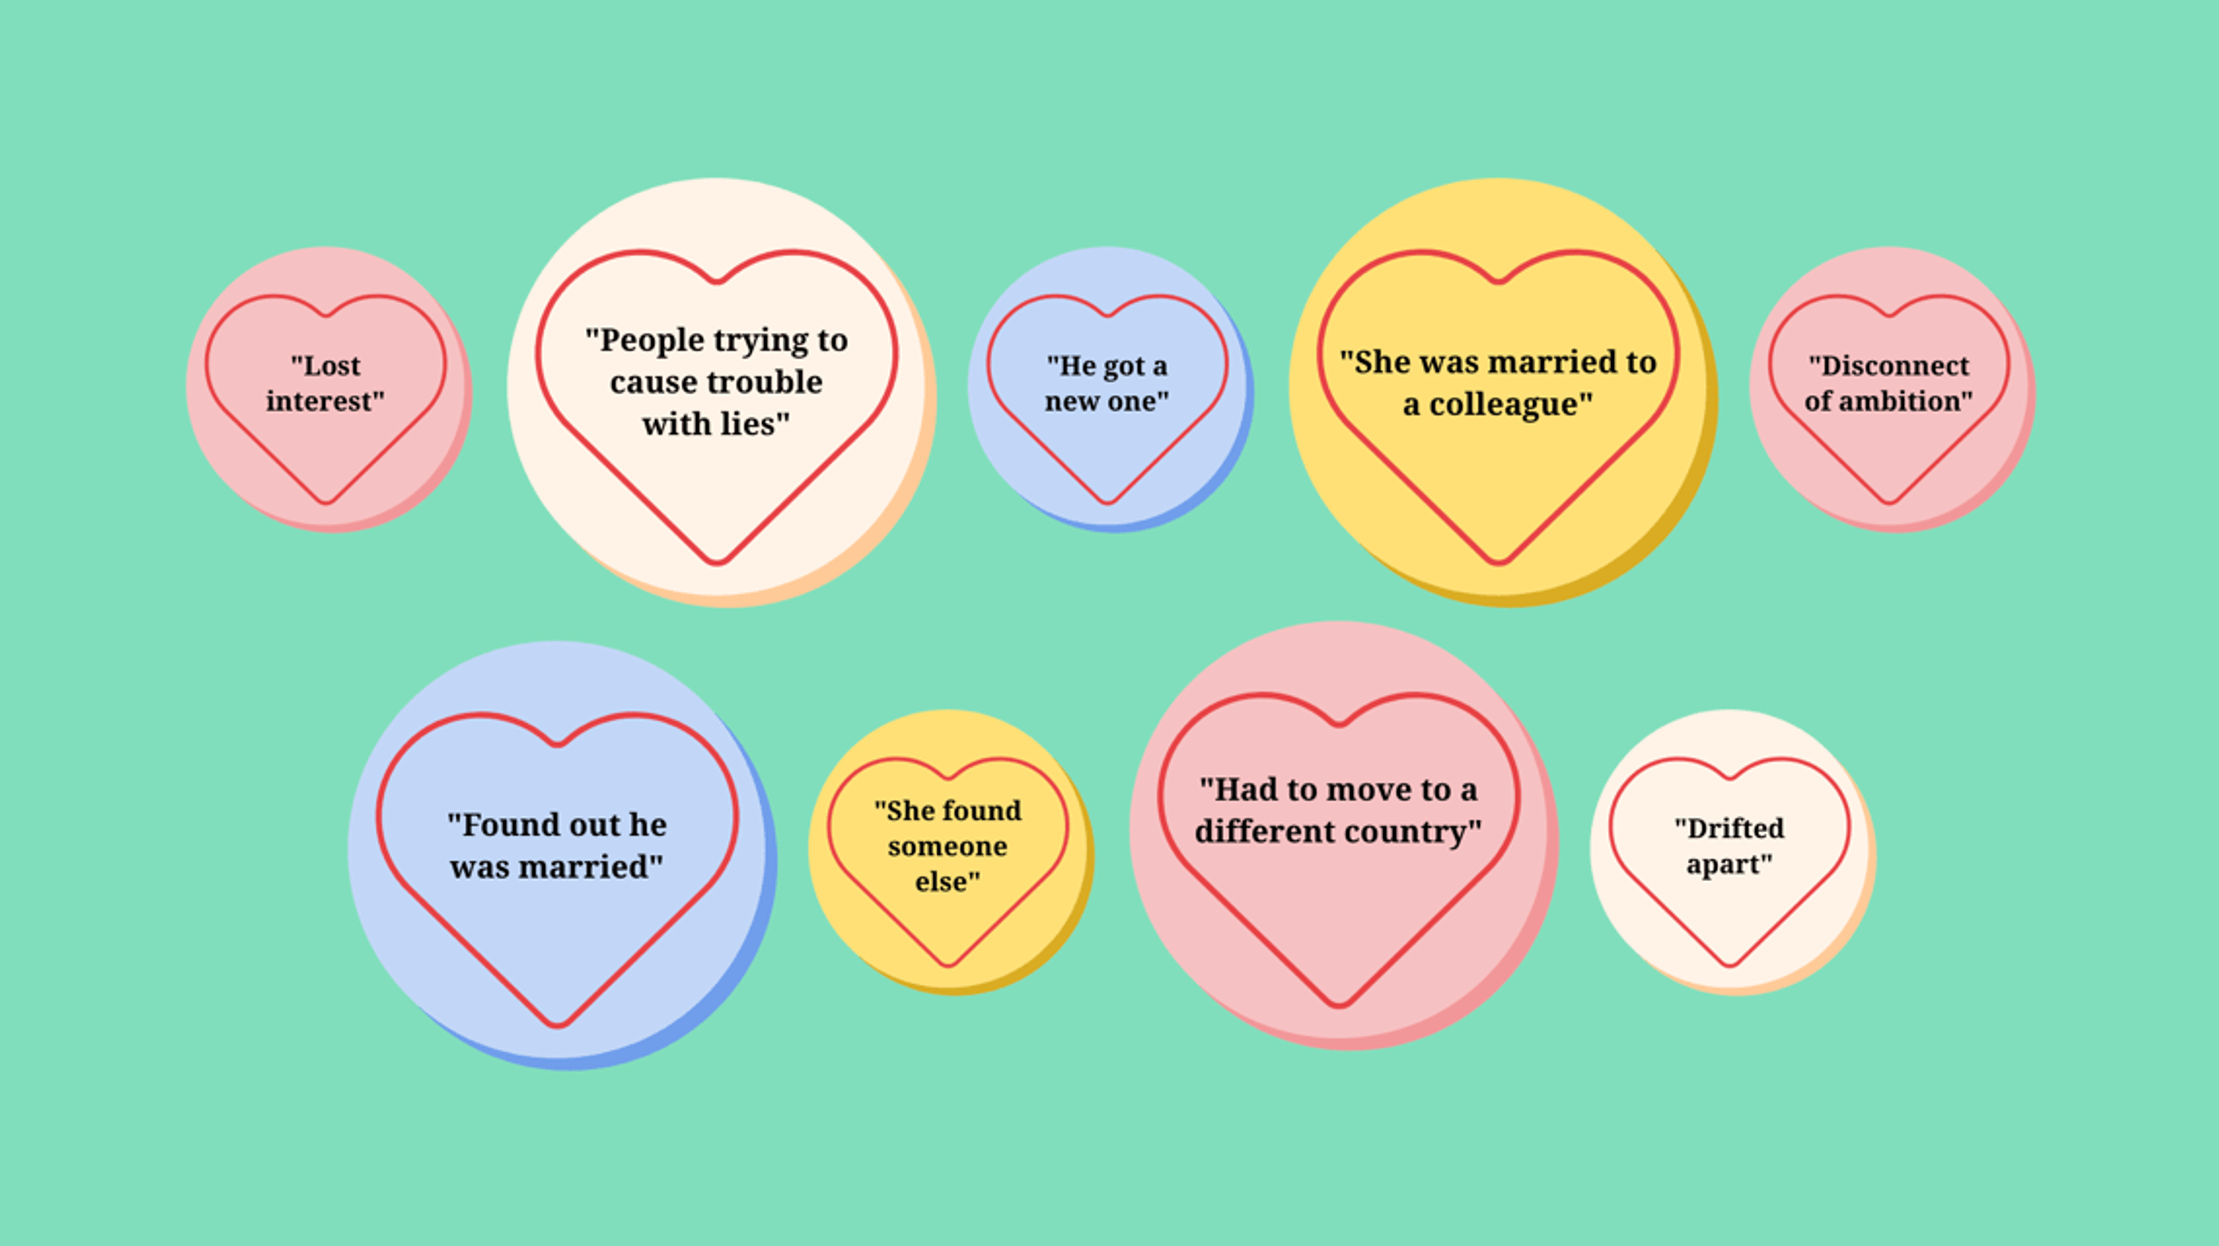 A series of love heart graphics in the shape of the candy with the same name. Each contains ways workplace relationships and crushes might end like 'Drifted apart' or 'She found someone else'.